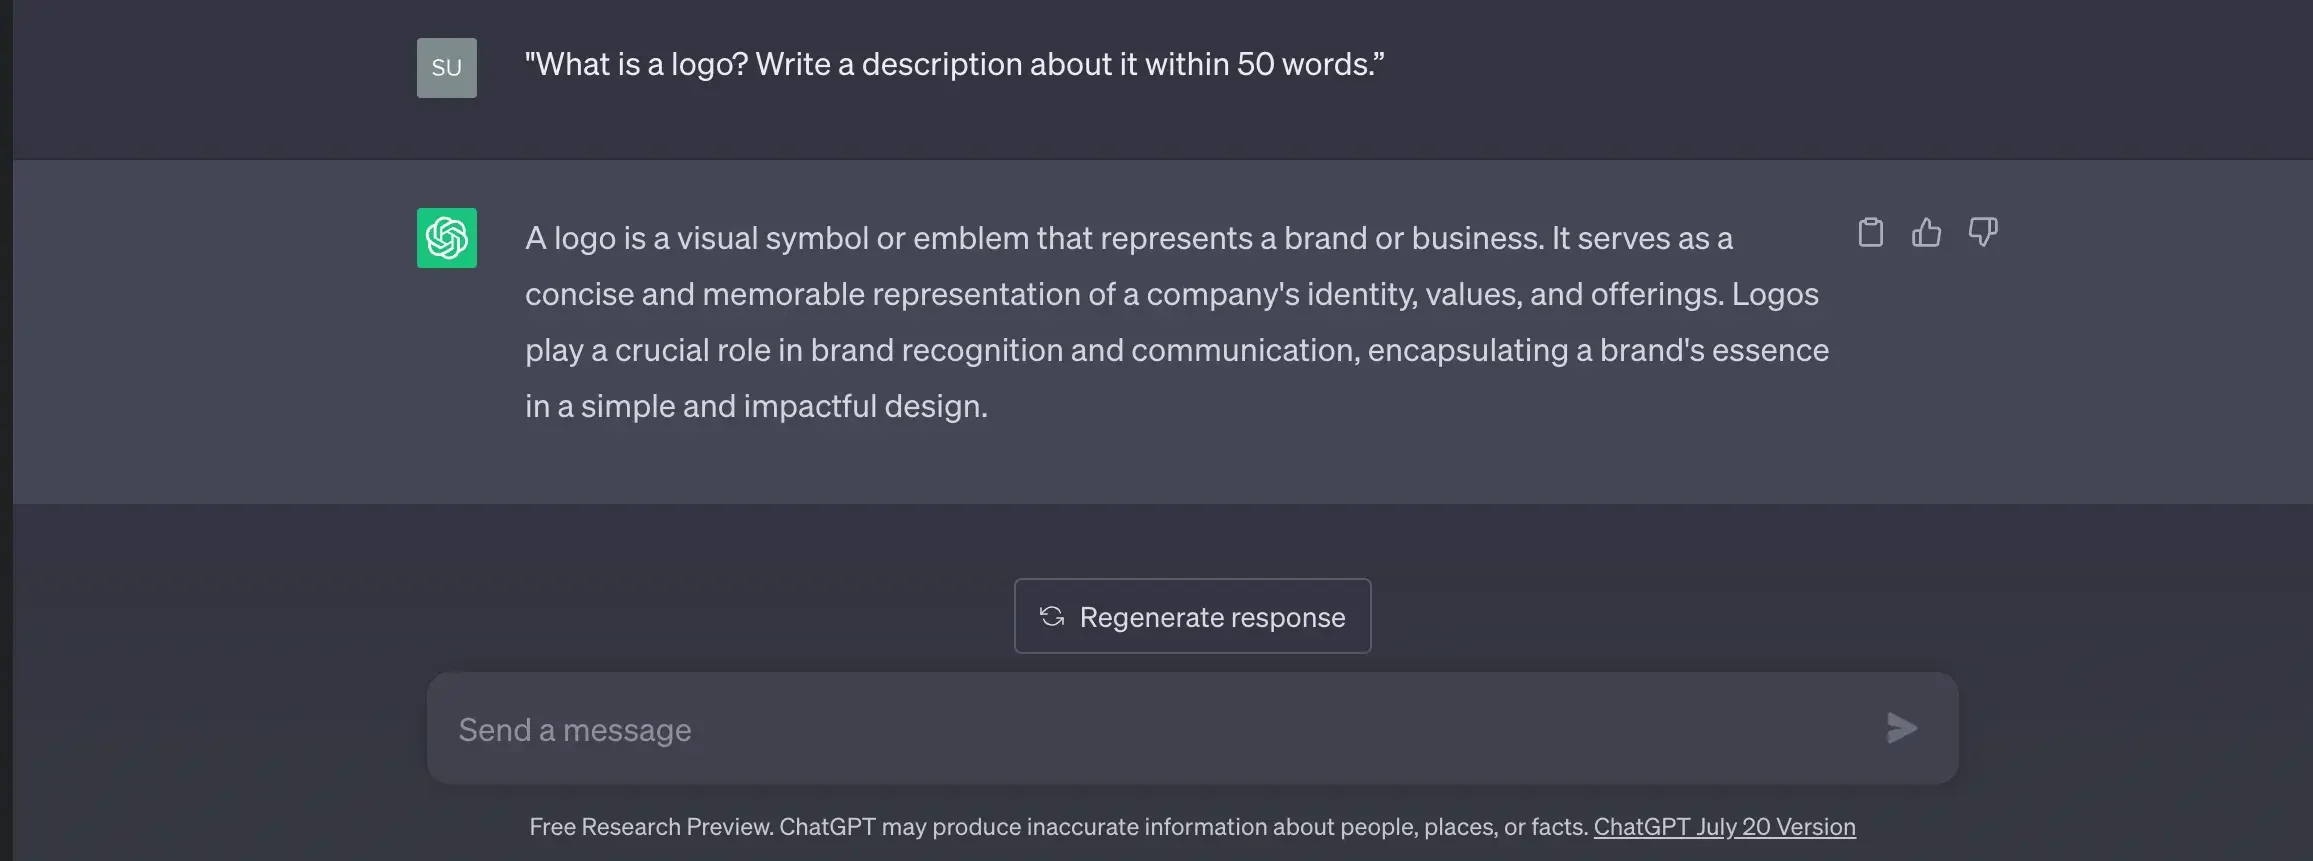 what is a logo chatgpt prompts